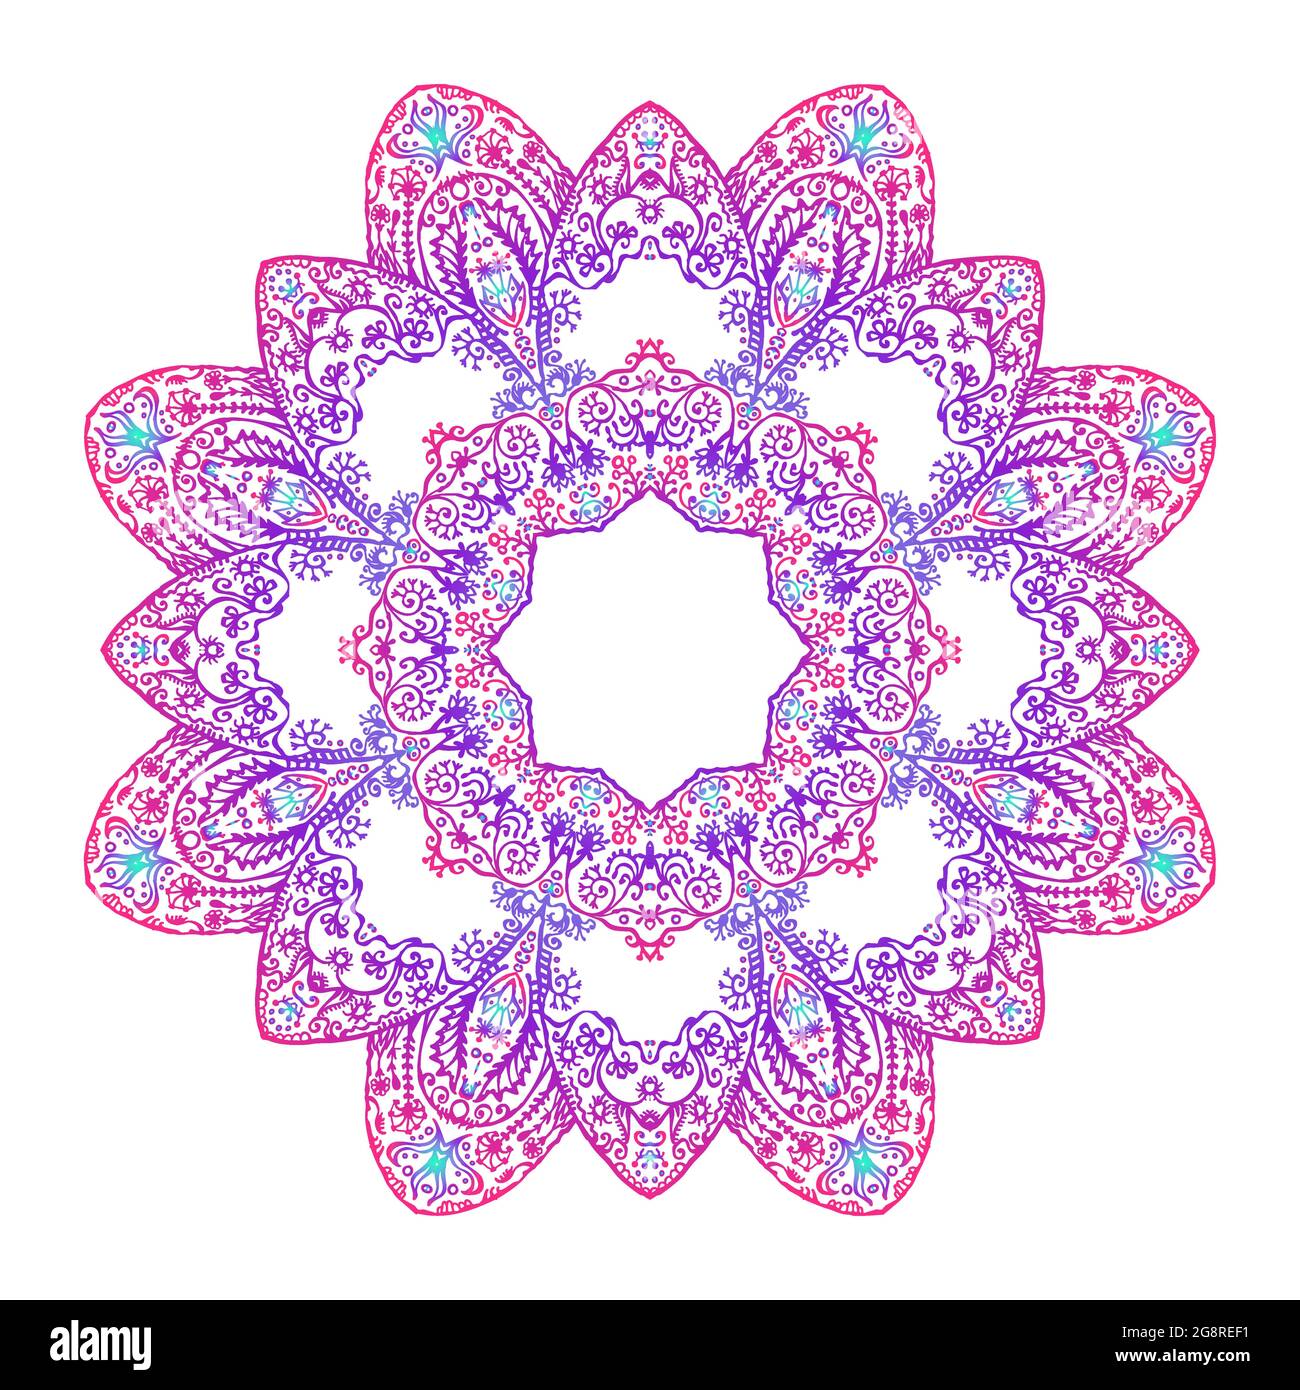 Colorful lacy zen doodle mandala on white Stock Vector